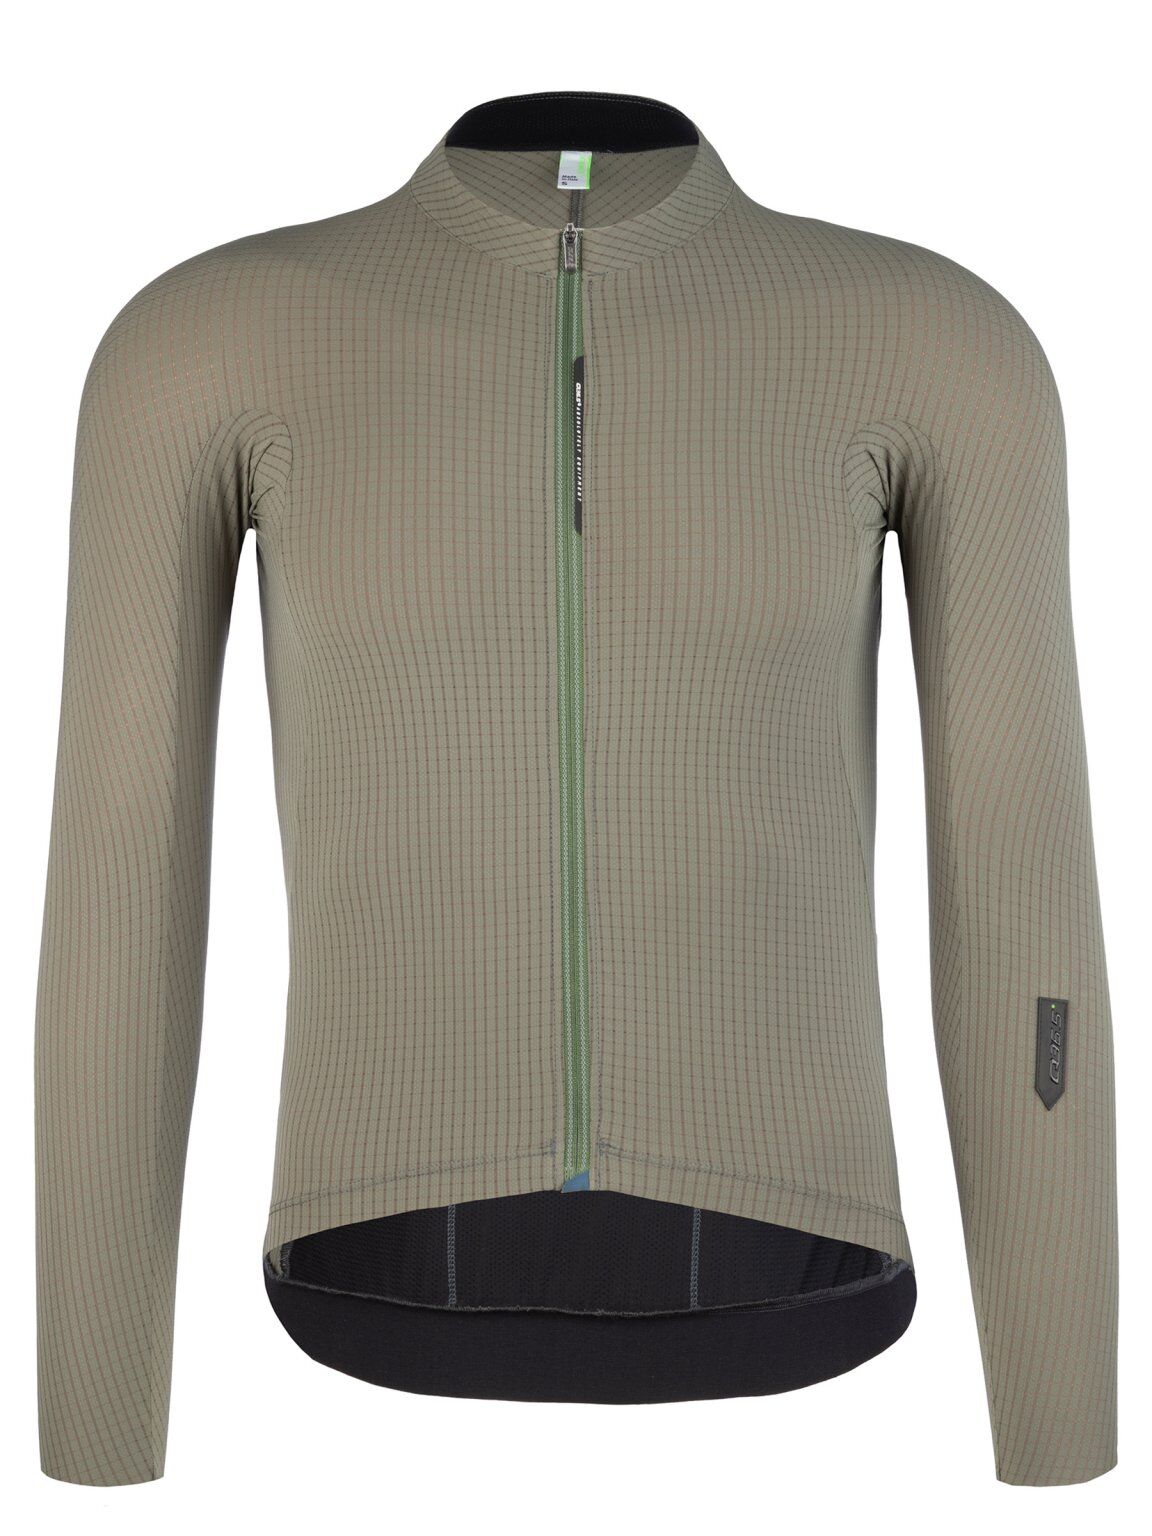 Q36.5 Jersey Long Sleeve L1 Pinstripe X - Maillot ciclismo - Hombre